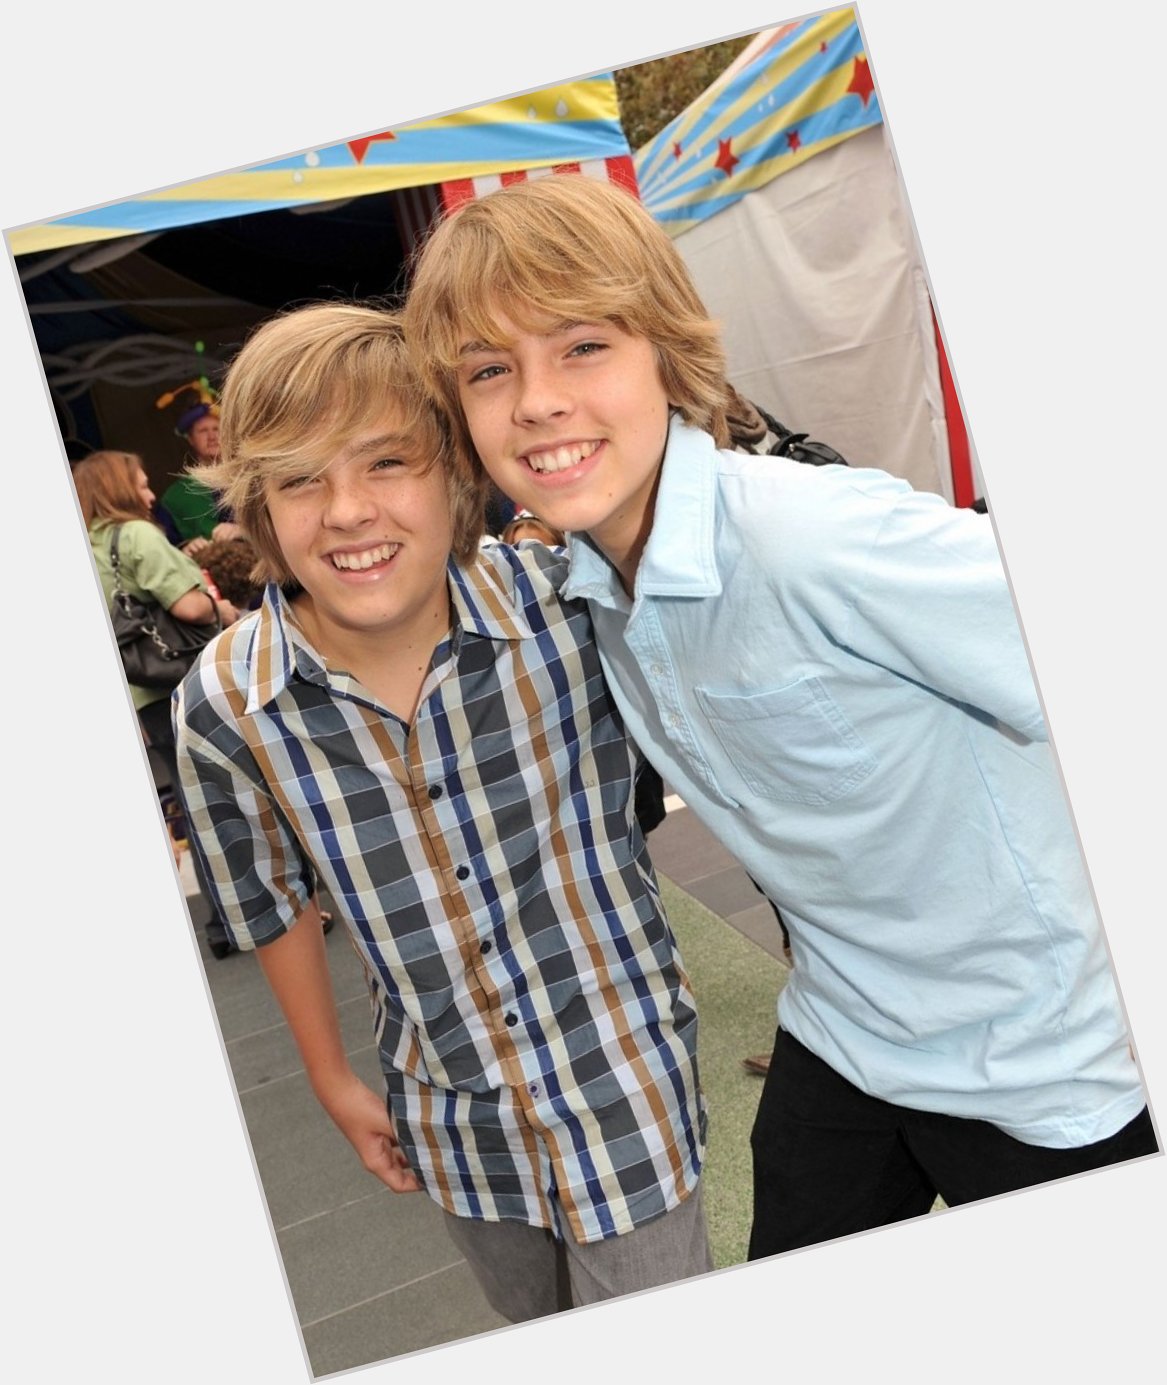 Happy bday Dylan and Cole Sprouse!!       